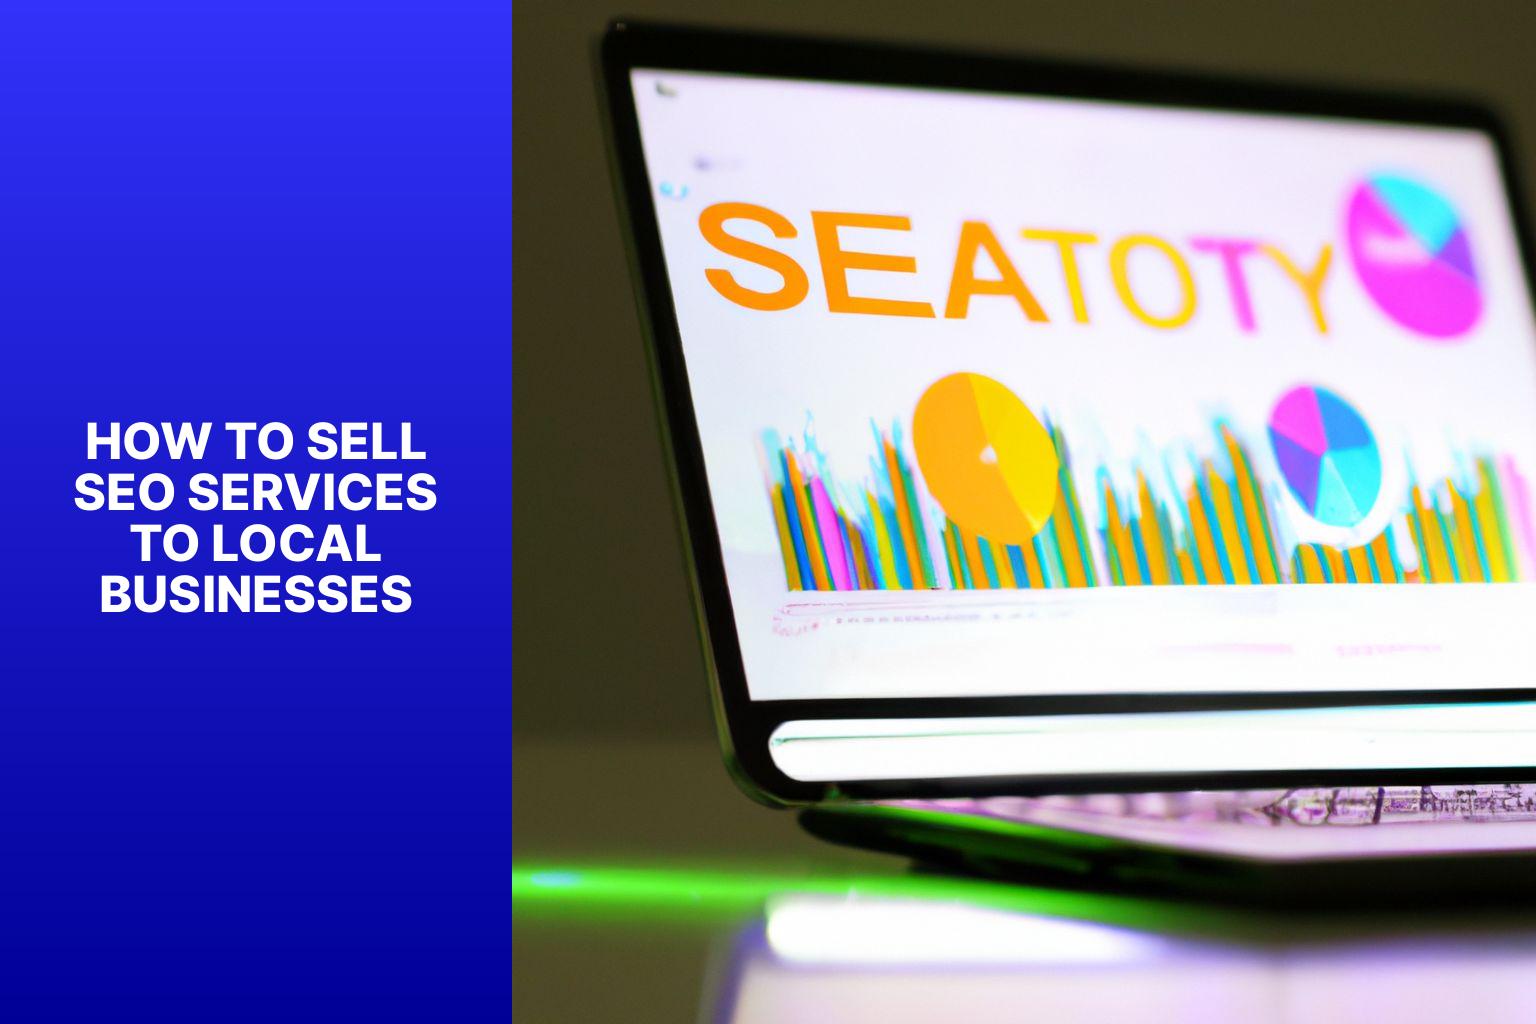 How to Sell SEO Services to Local Businesses